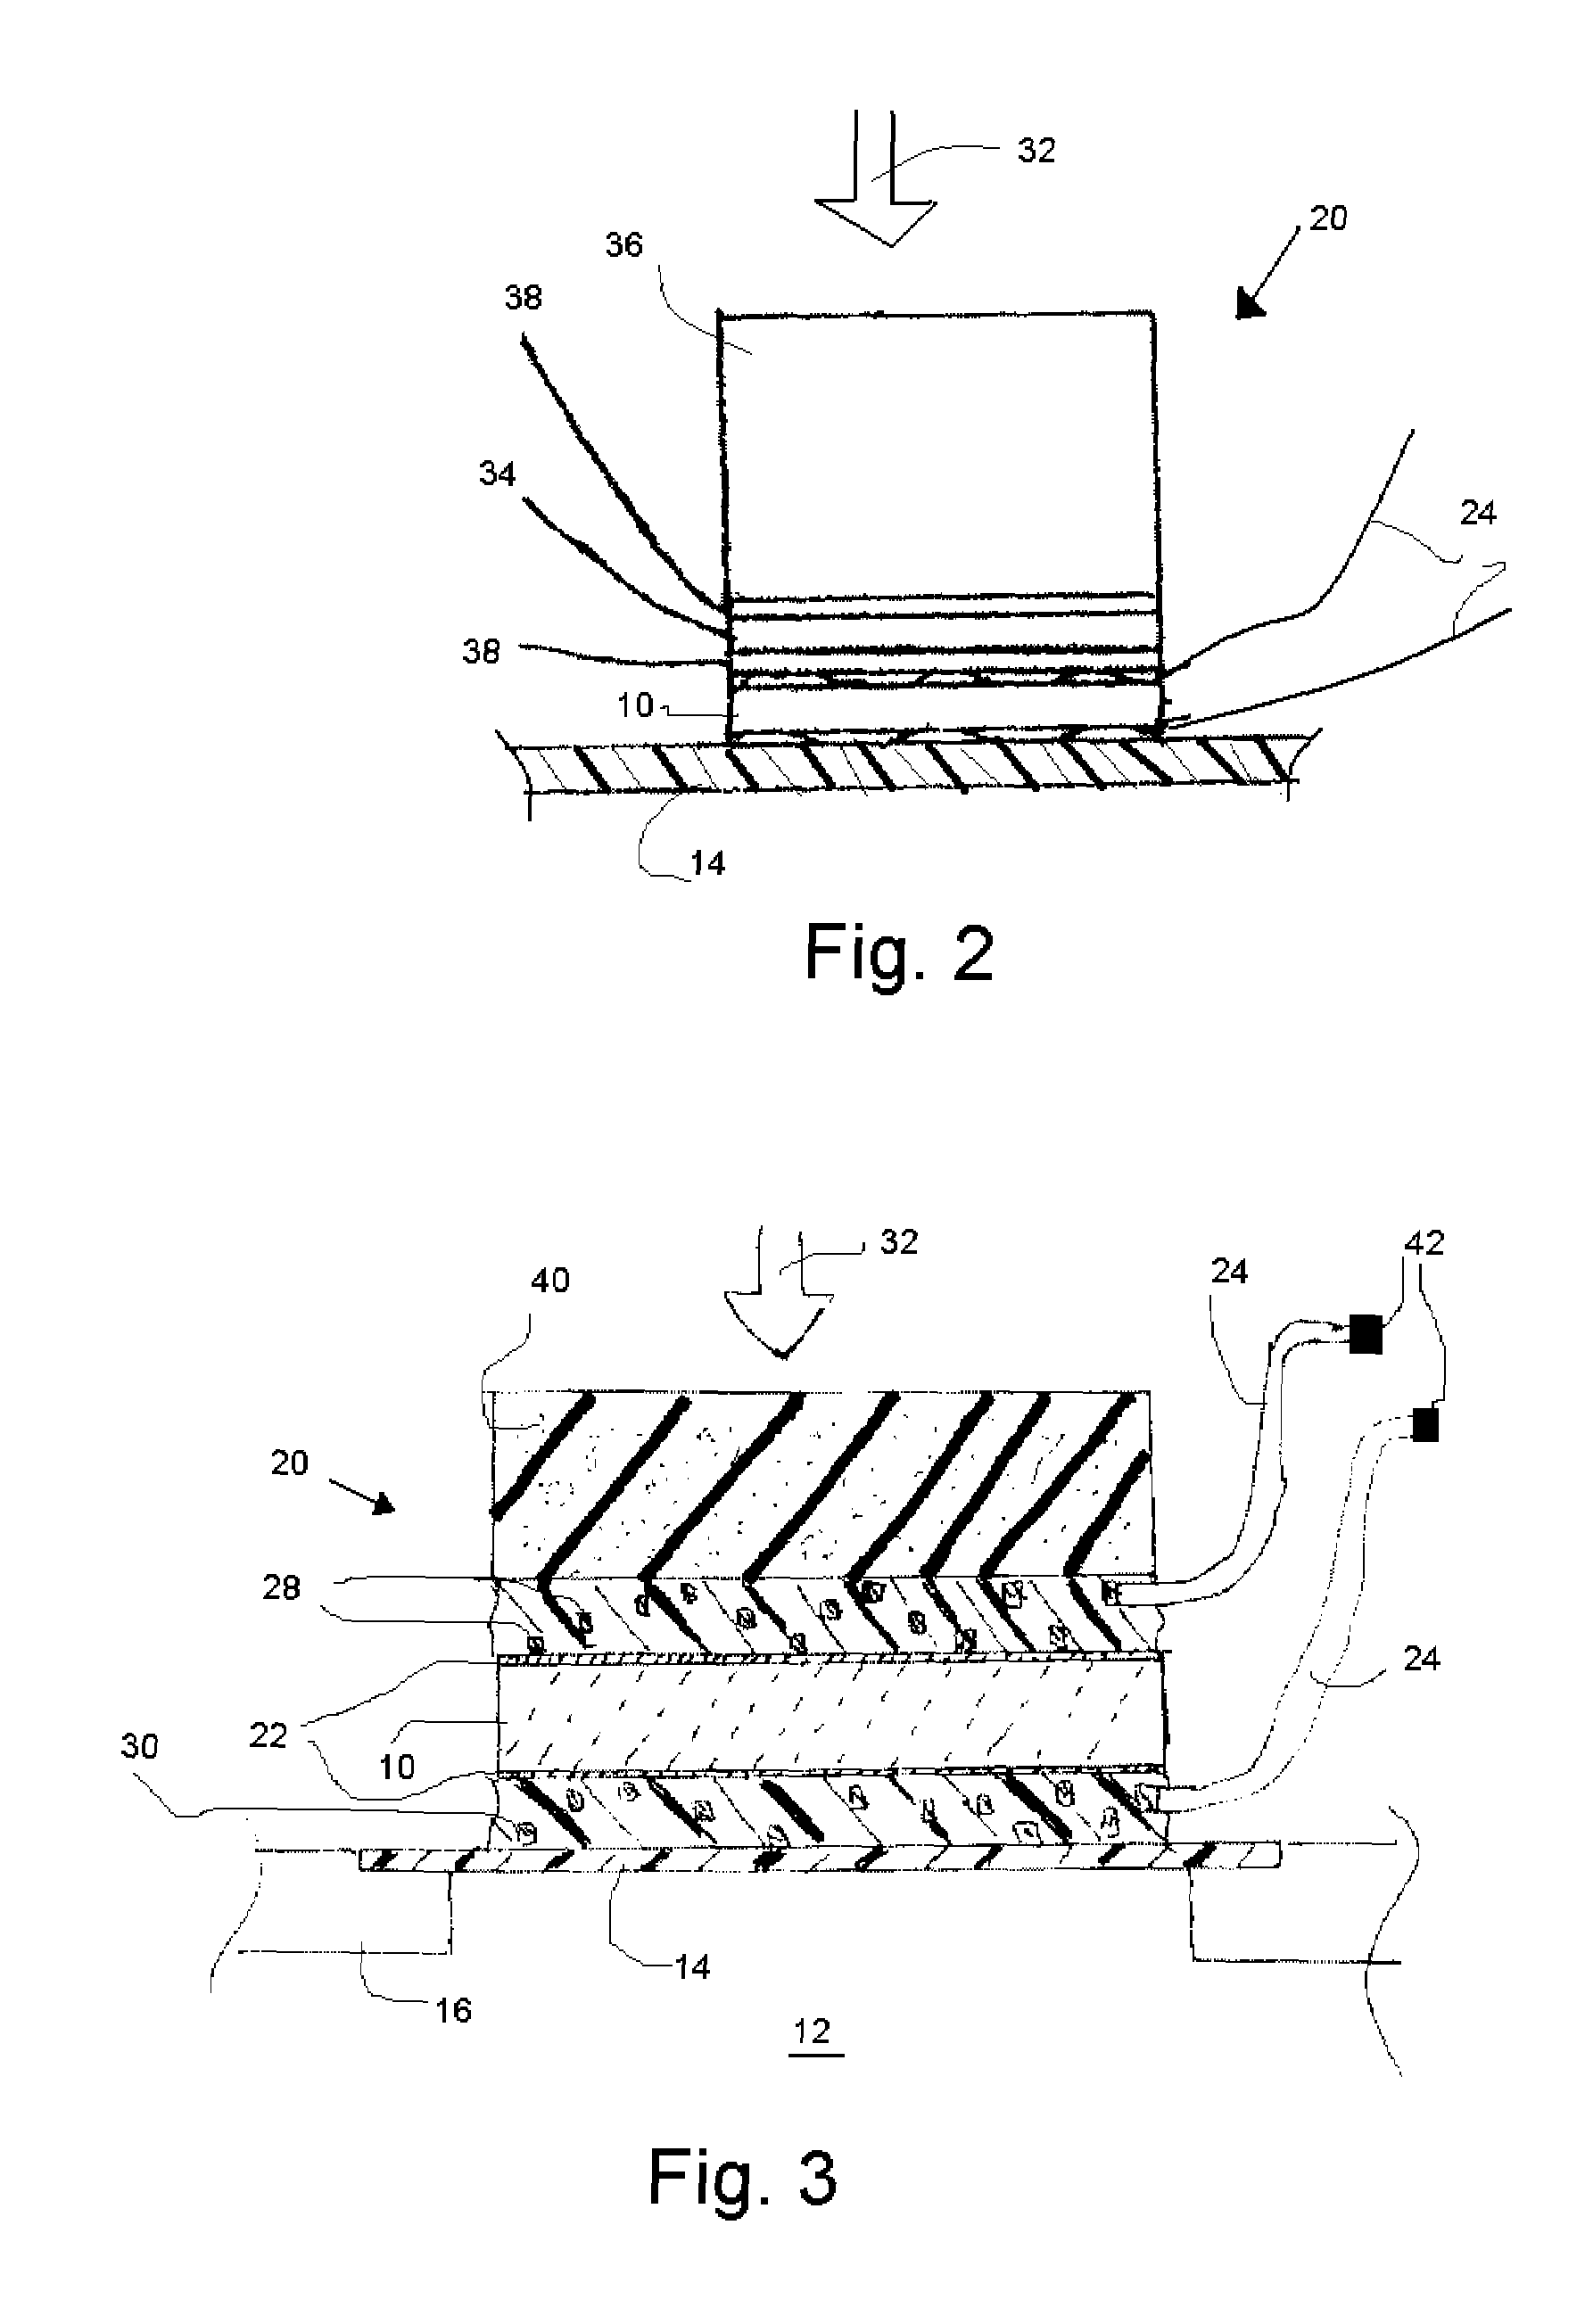 Piezoelectric transducer assembly